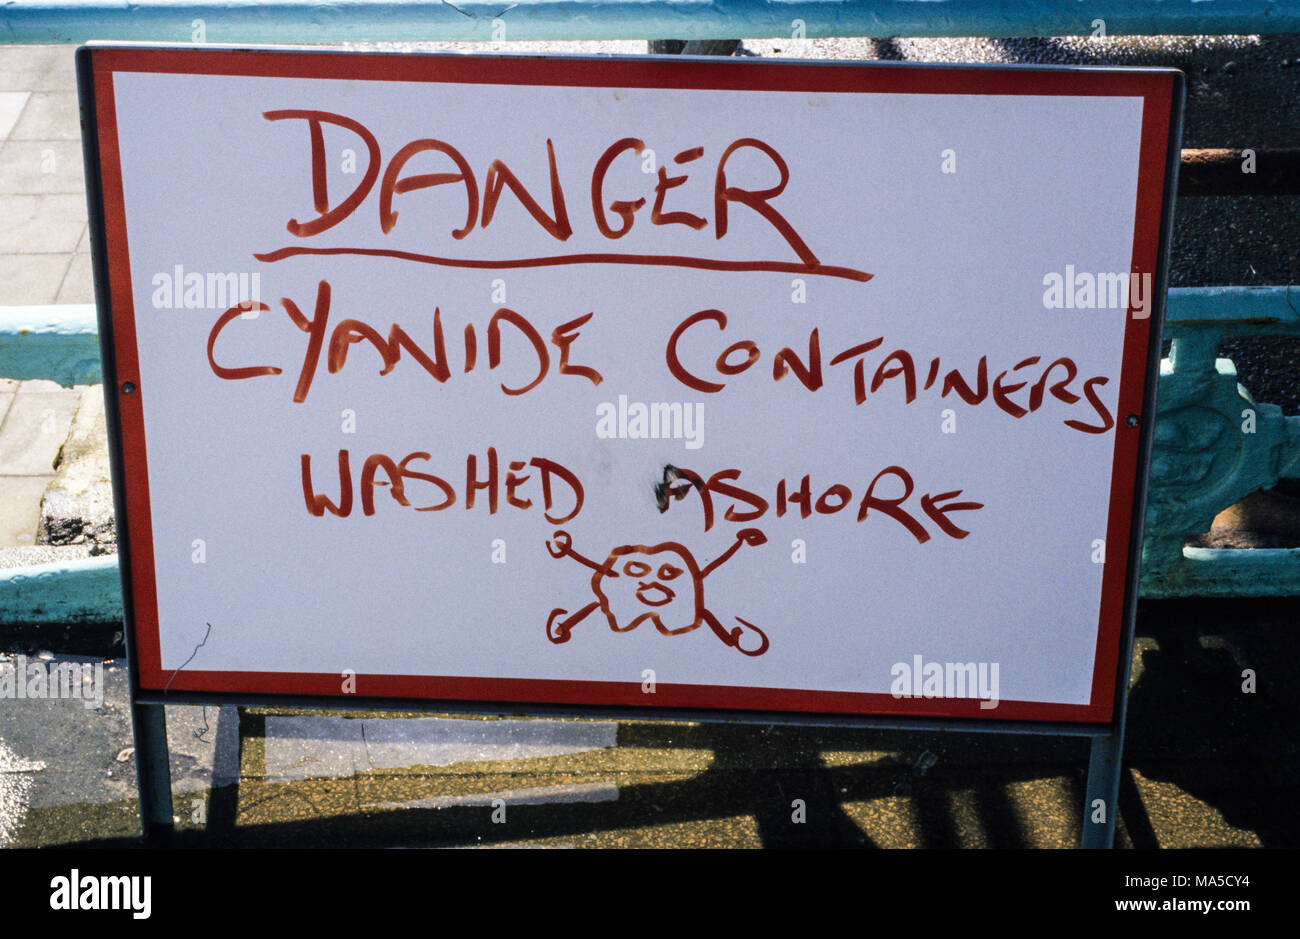 Danger Cyanide Containers Washed Ashore, Brighton Beach, Brighton, East Sussex, England, UK. Stock Photo